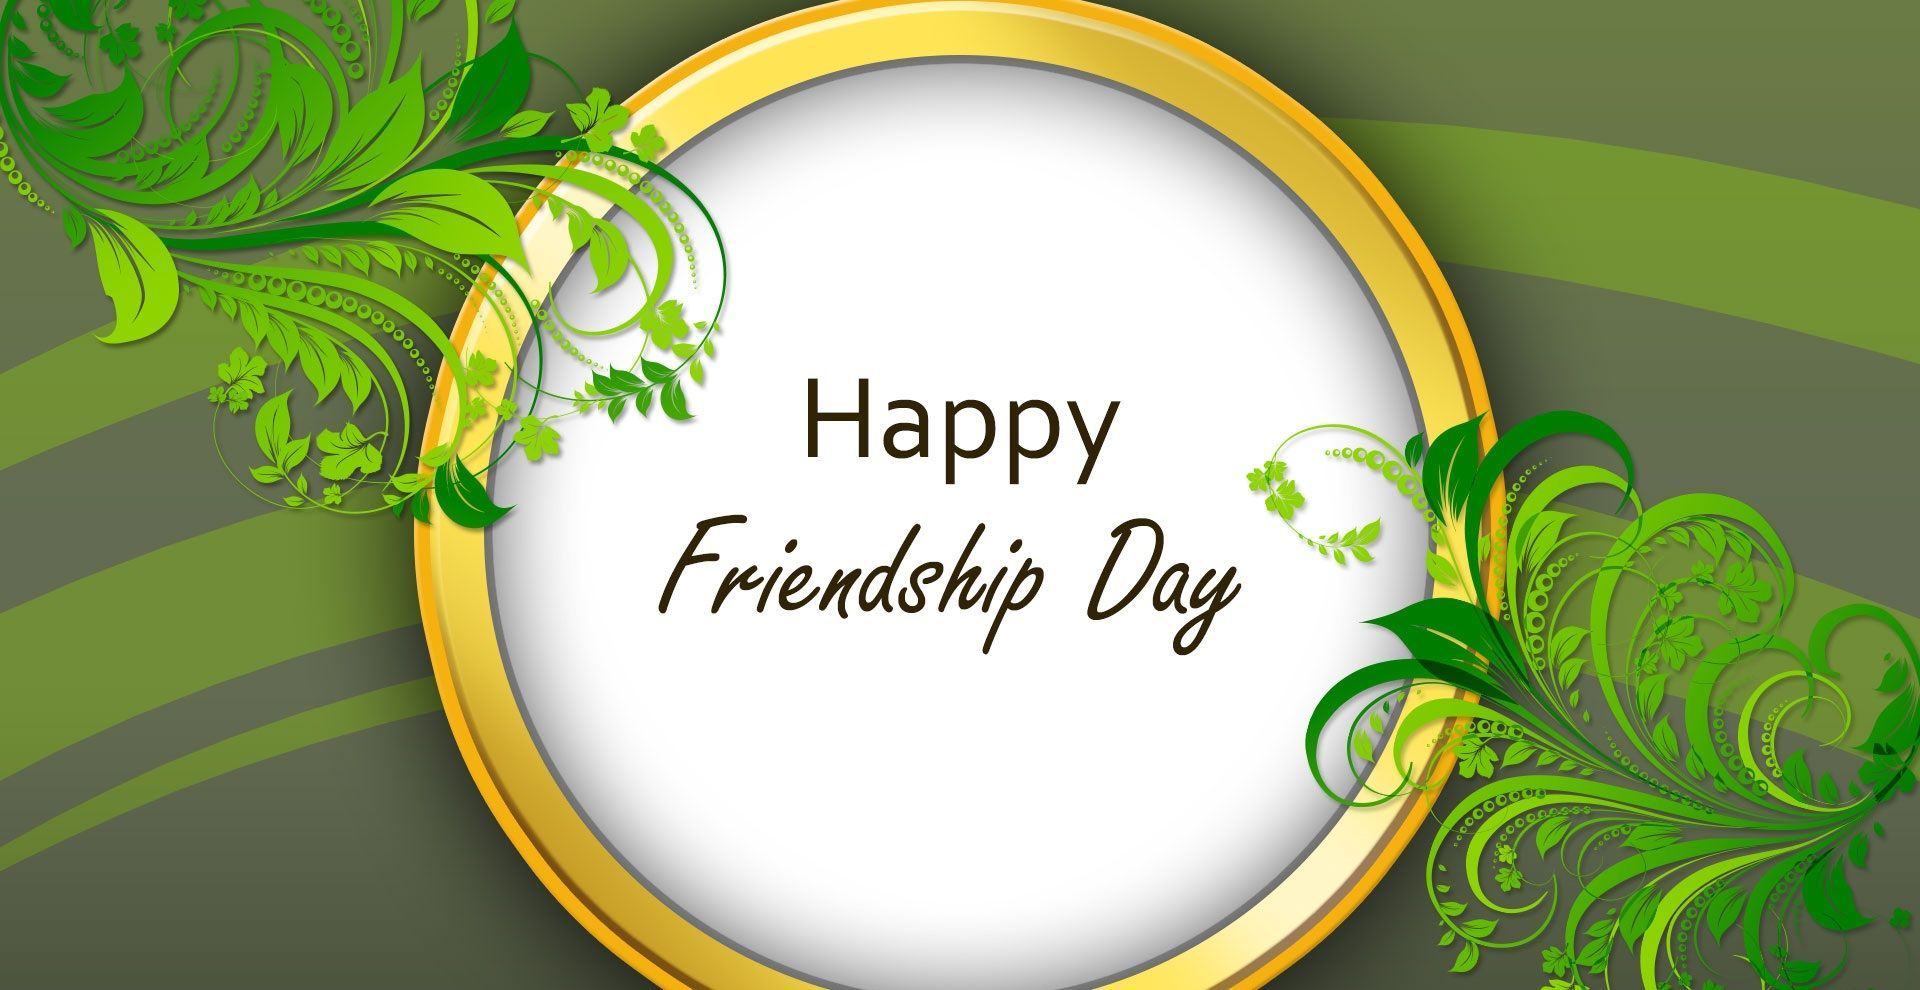 Friendship Day Love Wallpaper With Quotes. Happy friendship, Friendship day wallpaper, Happy friendship day